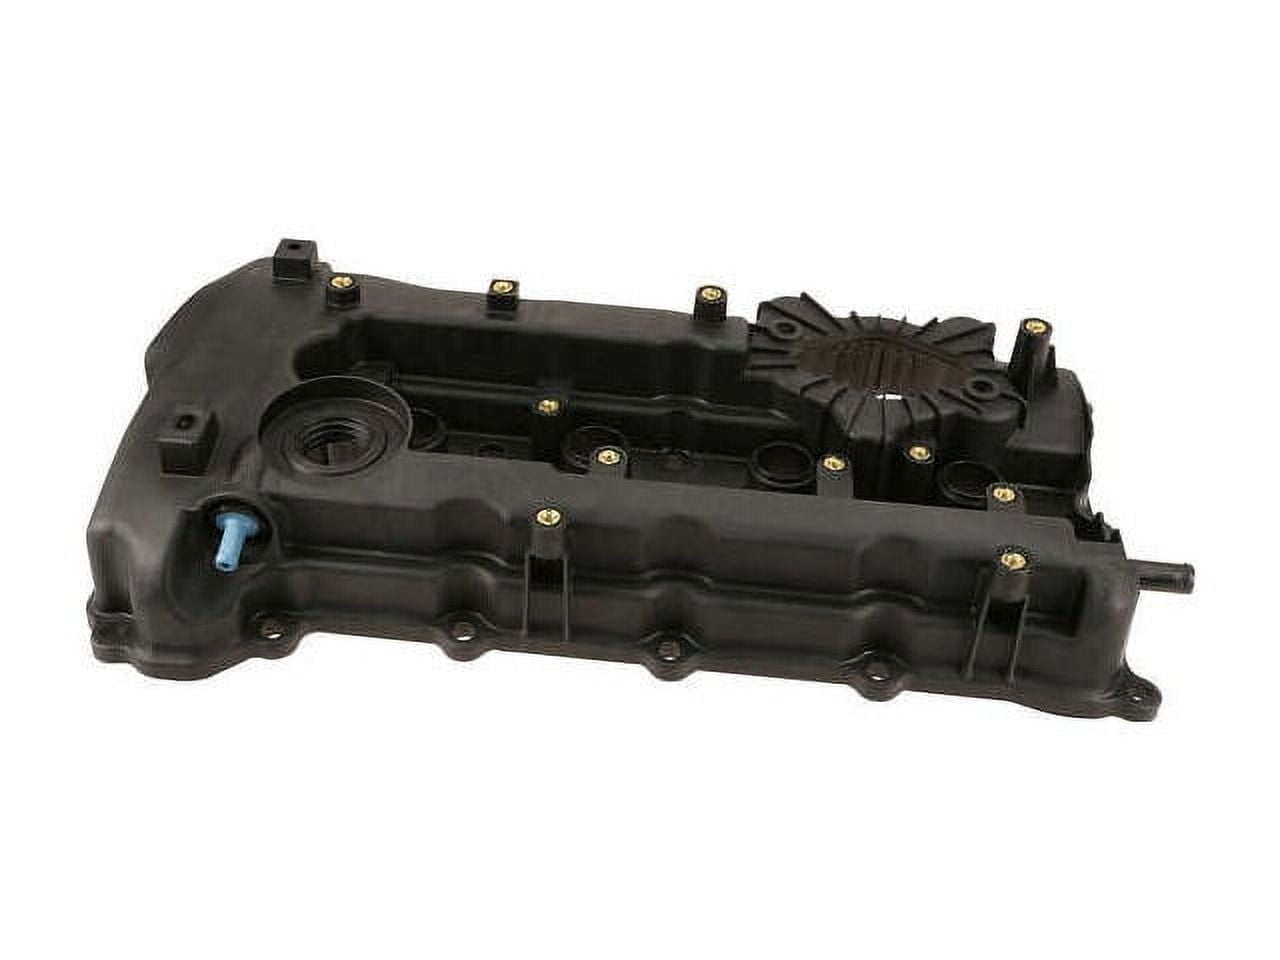 Engine Valve Cover with Gaskets Compatible with 2011 2014 Hyundai Sonata  (From 07/16/2010 Vehicle Production) 2012 2013